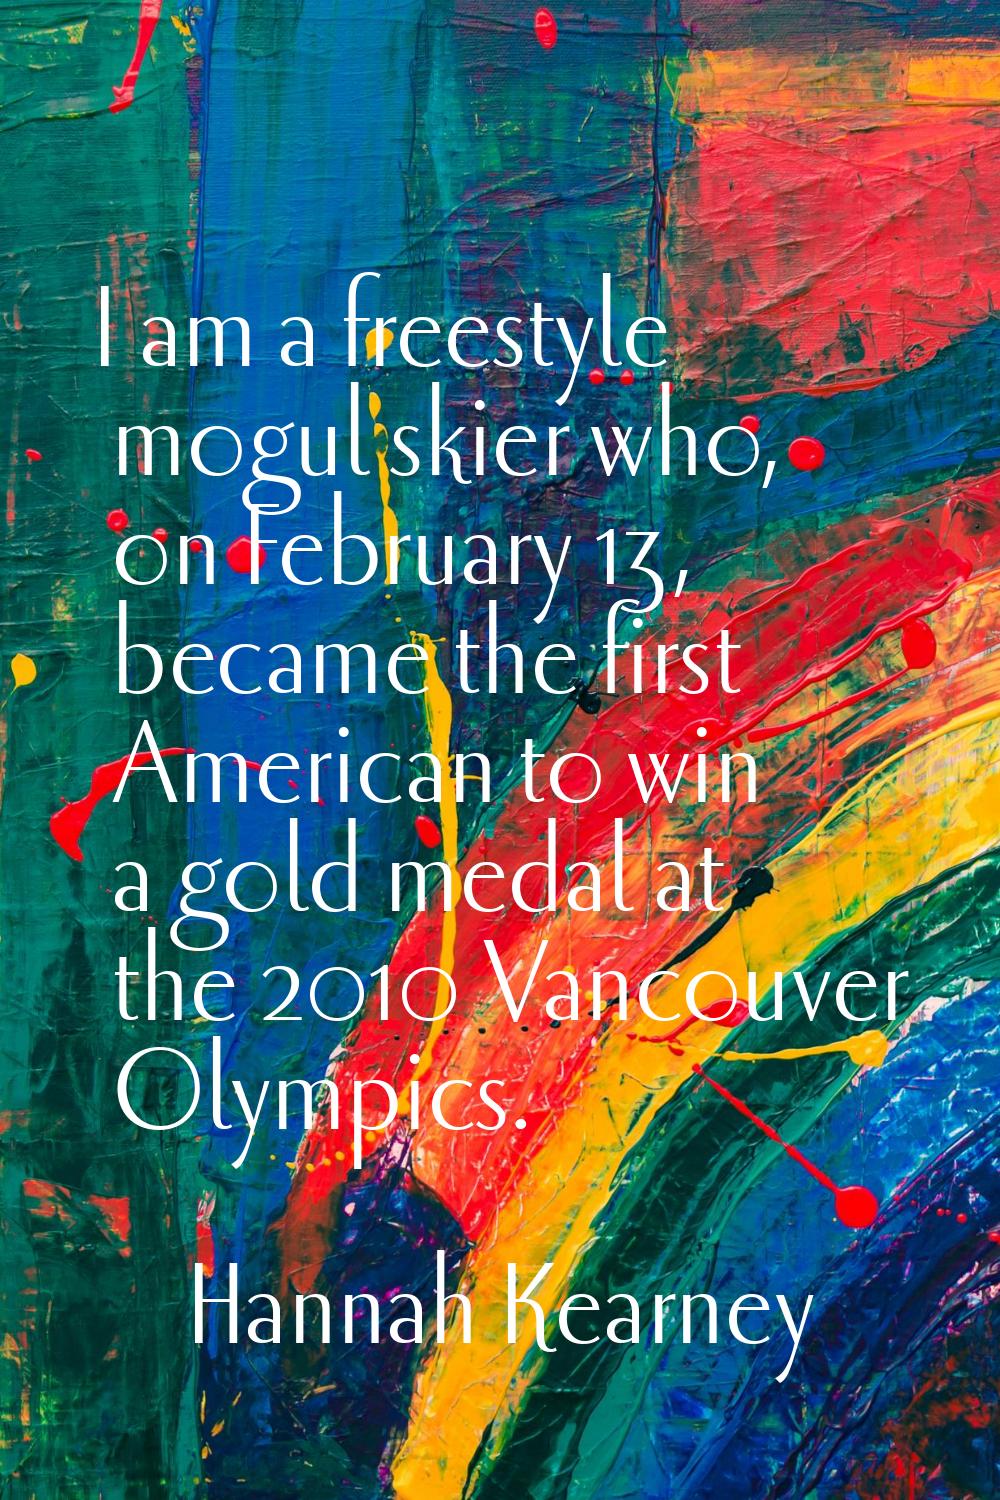 I am a freestyle mogul skier who, on February 13, became the first American to win a gold medal at 